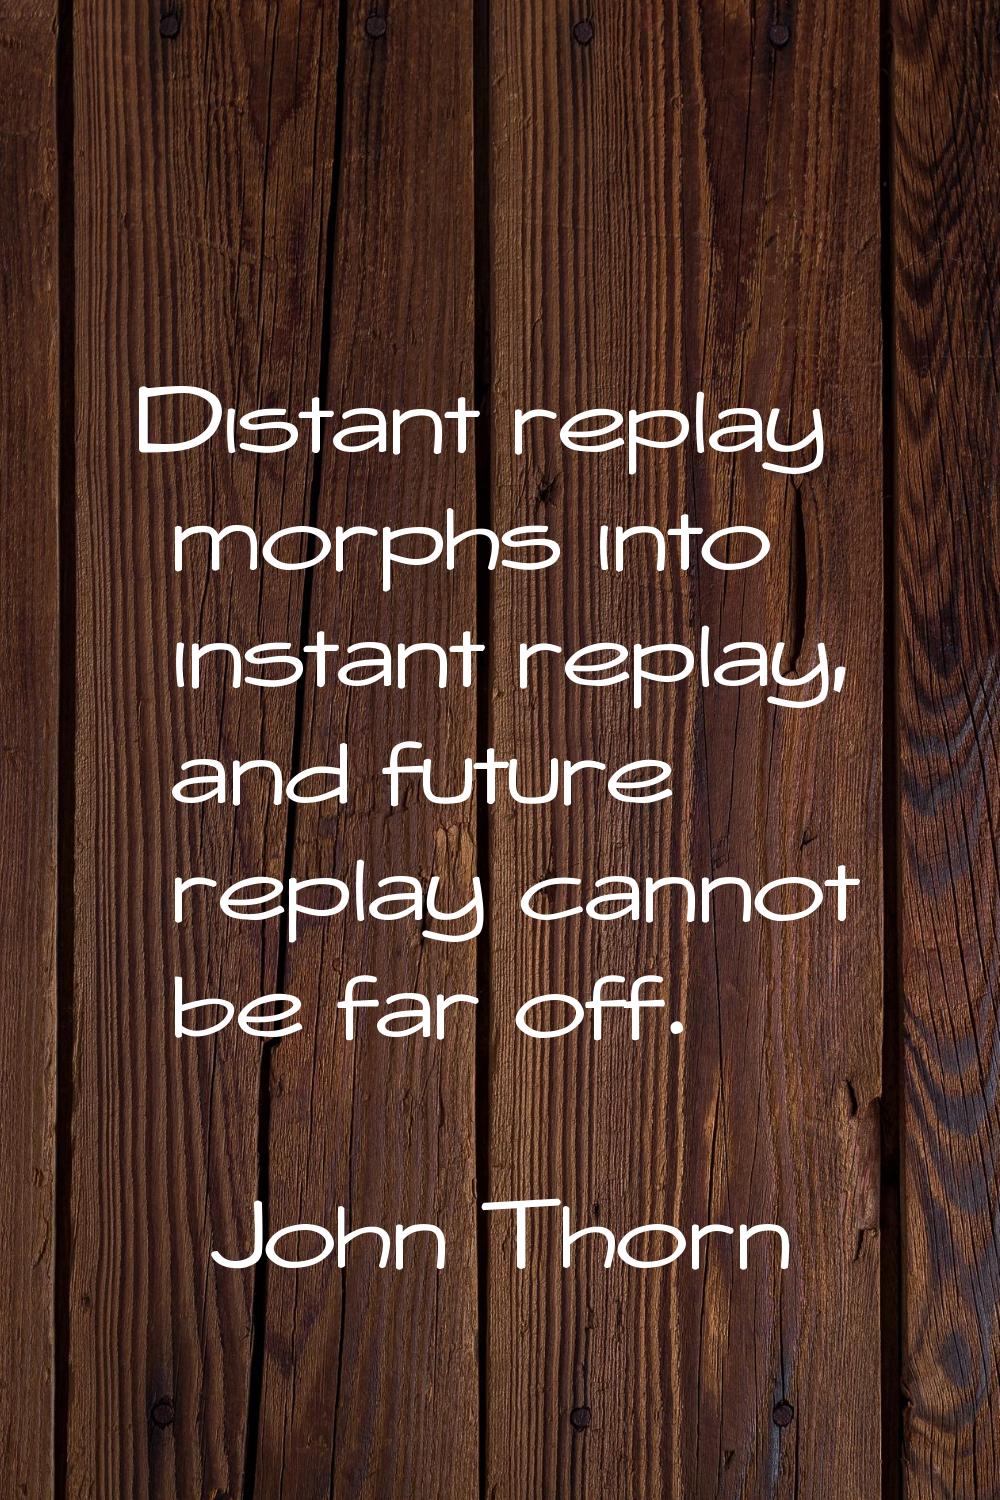 Distant replay morphs into instant replay, and future replay cannot be far off.